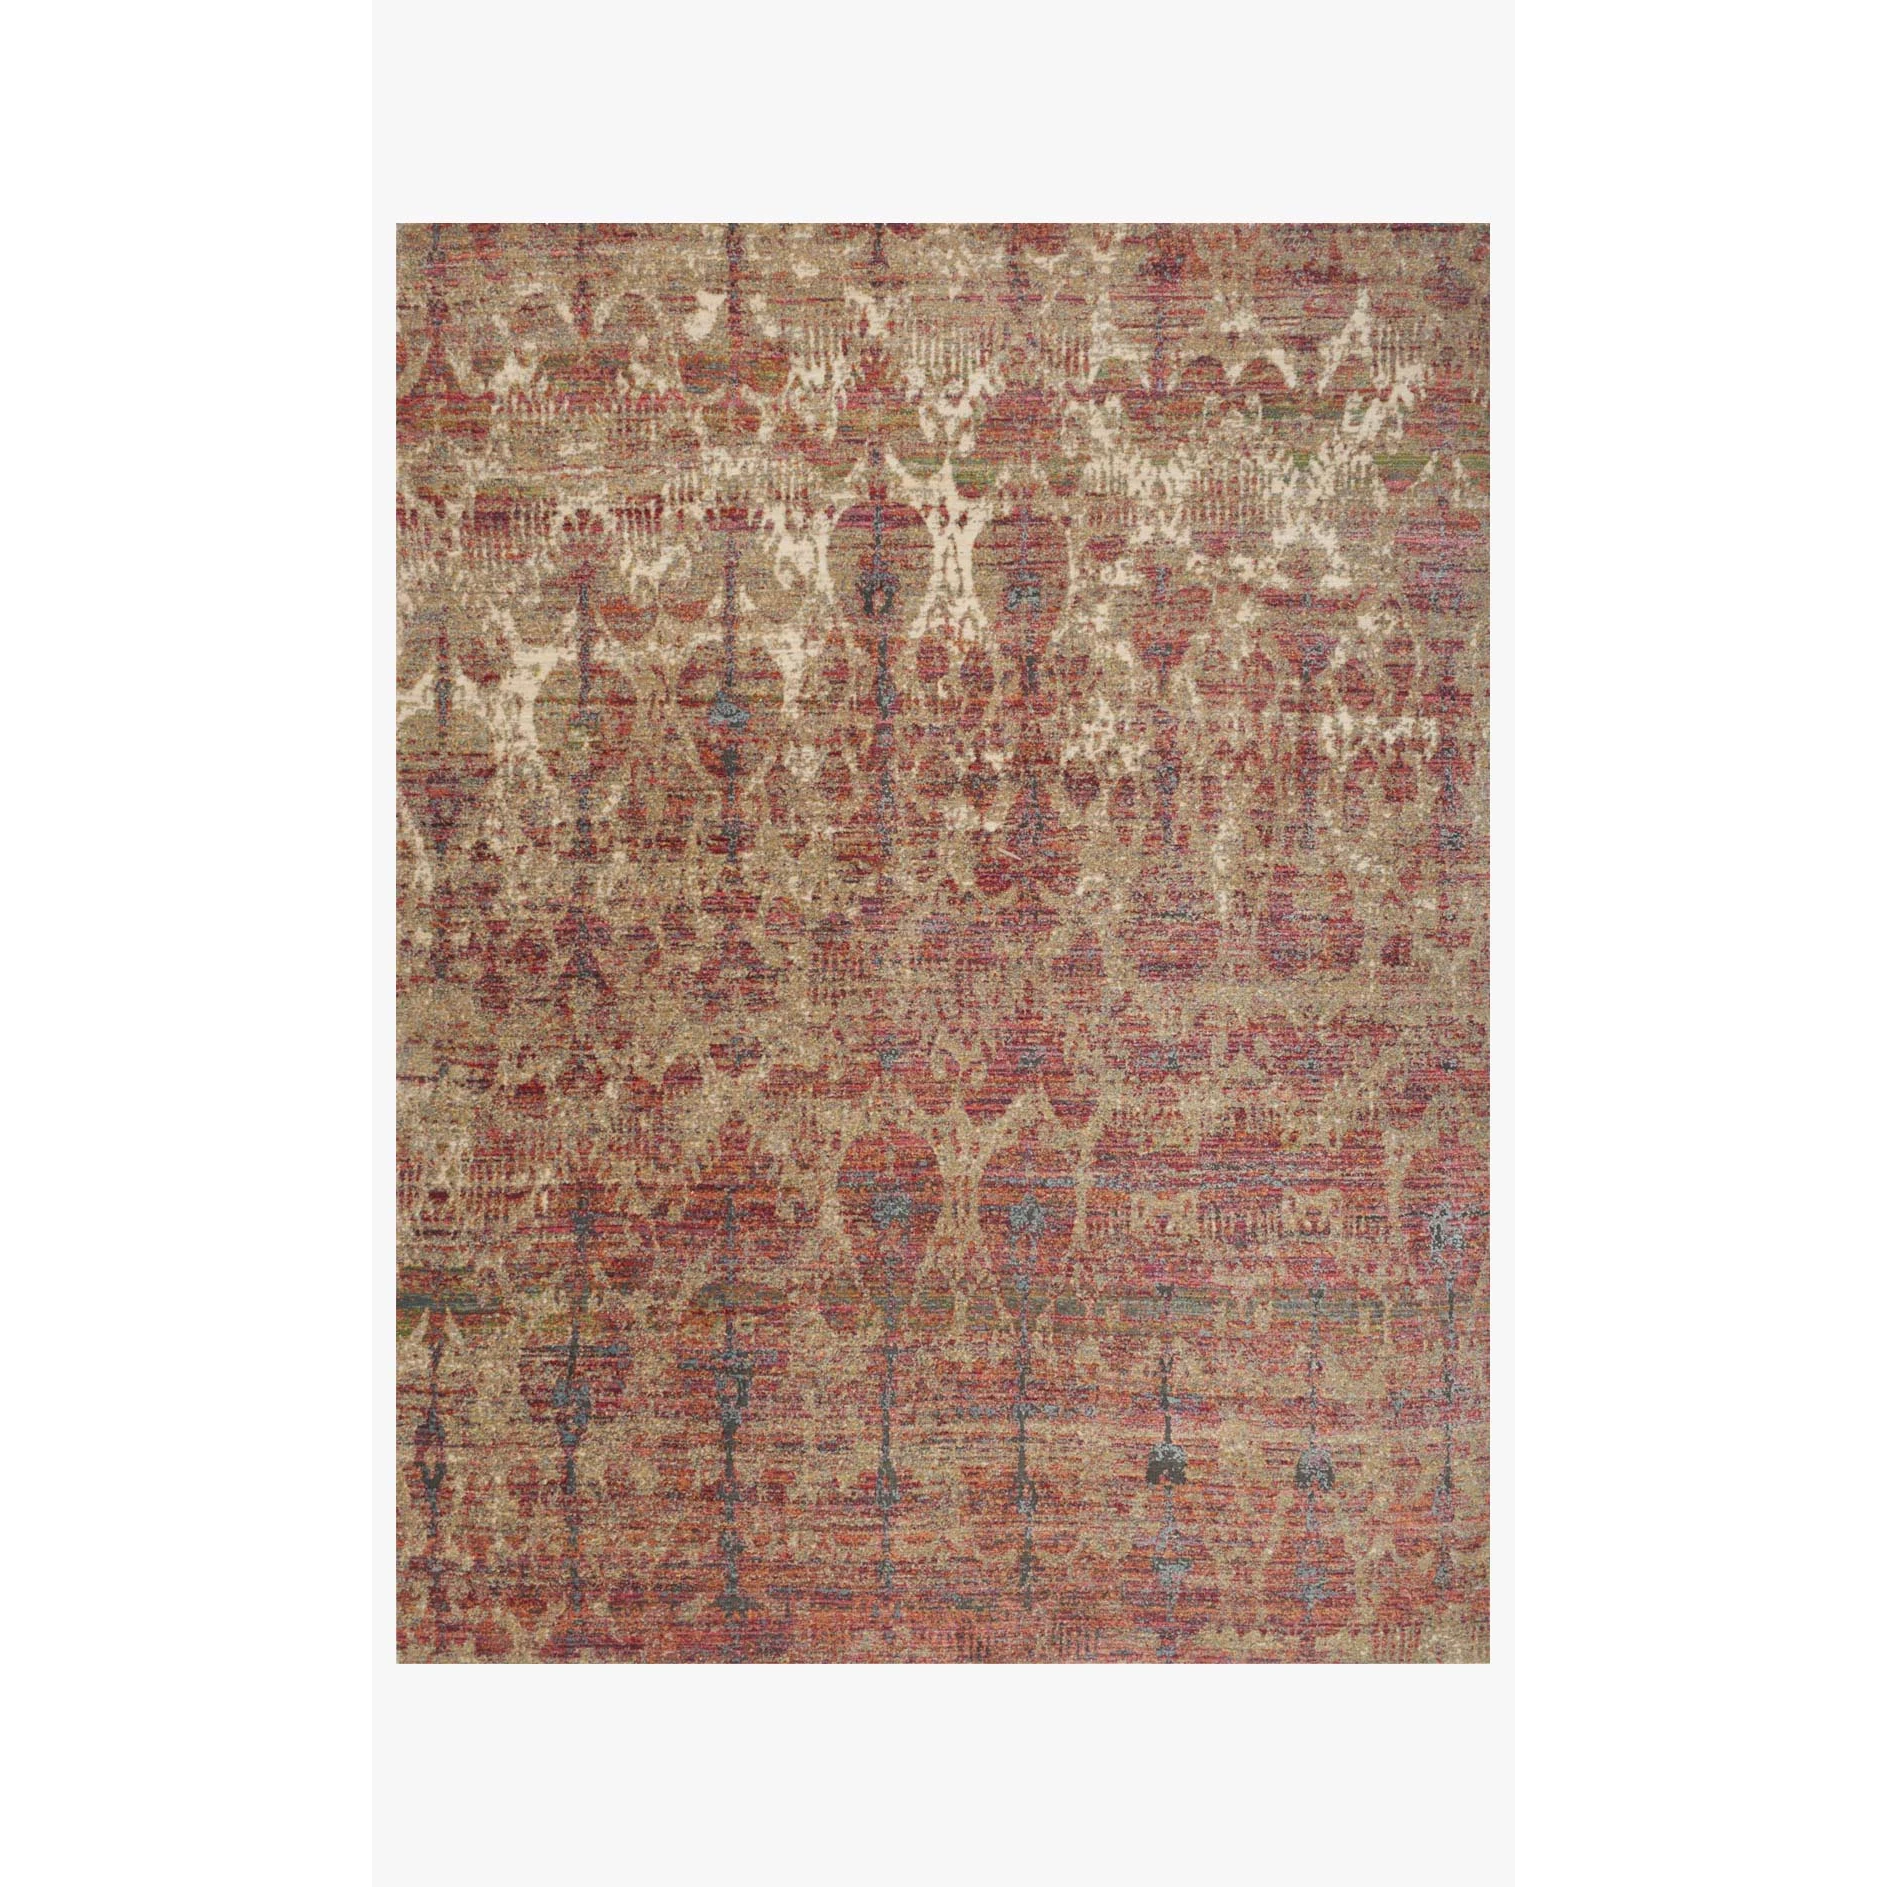 Javari Rugs by Loloi - JV-10 Drizzle/Berry-Loloi Rugs-Blue Hand Home